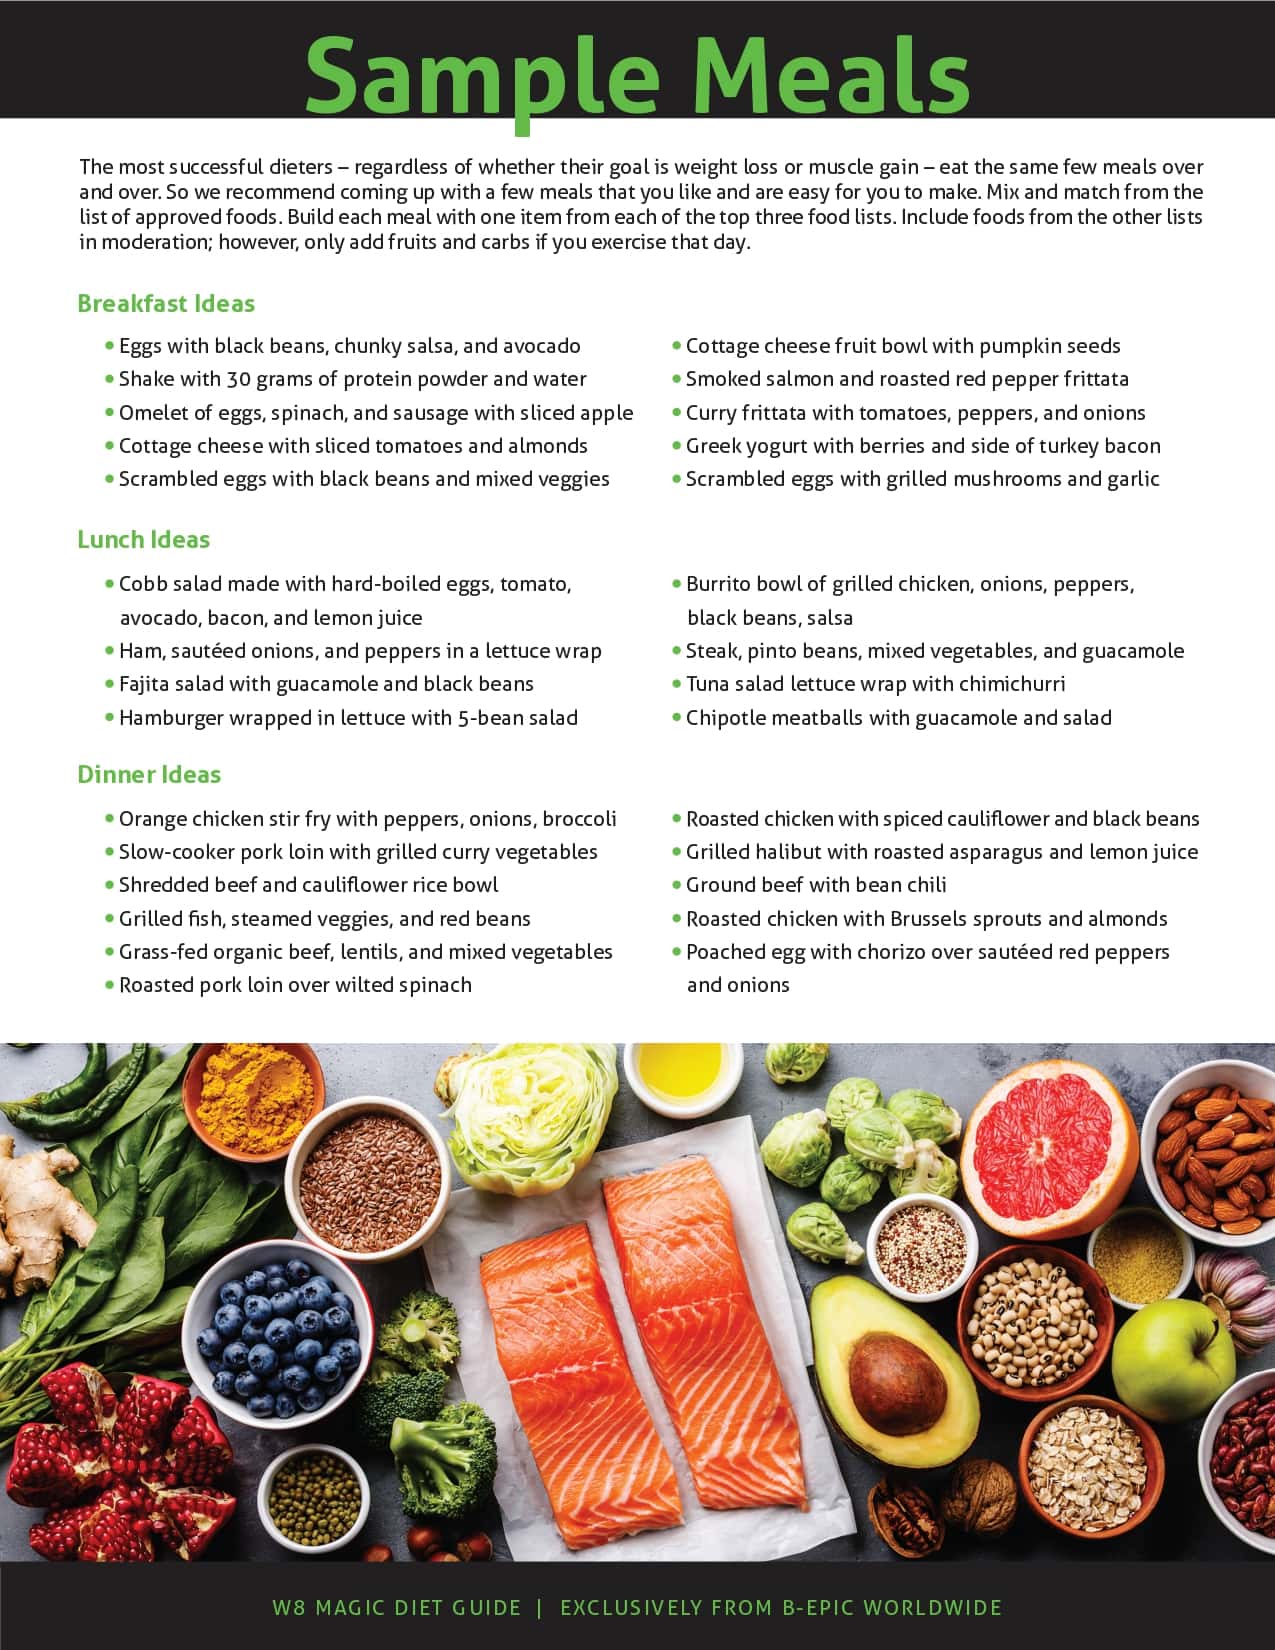 W8 Magic Diet Guide - page 3